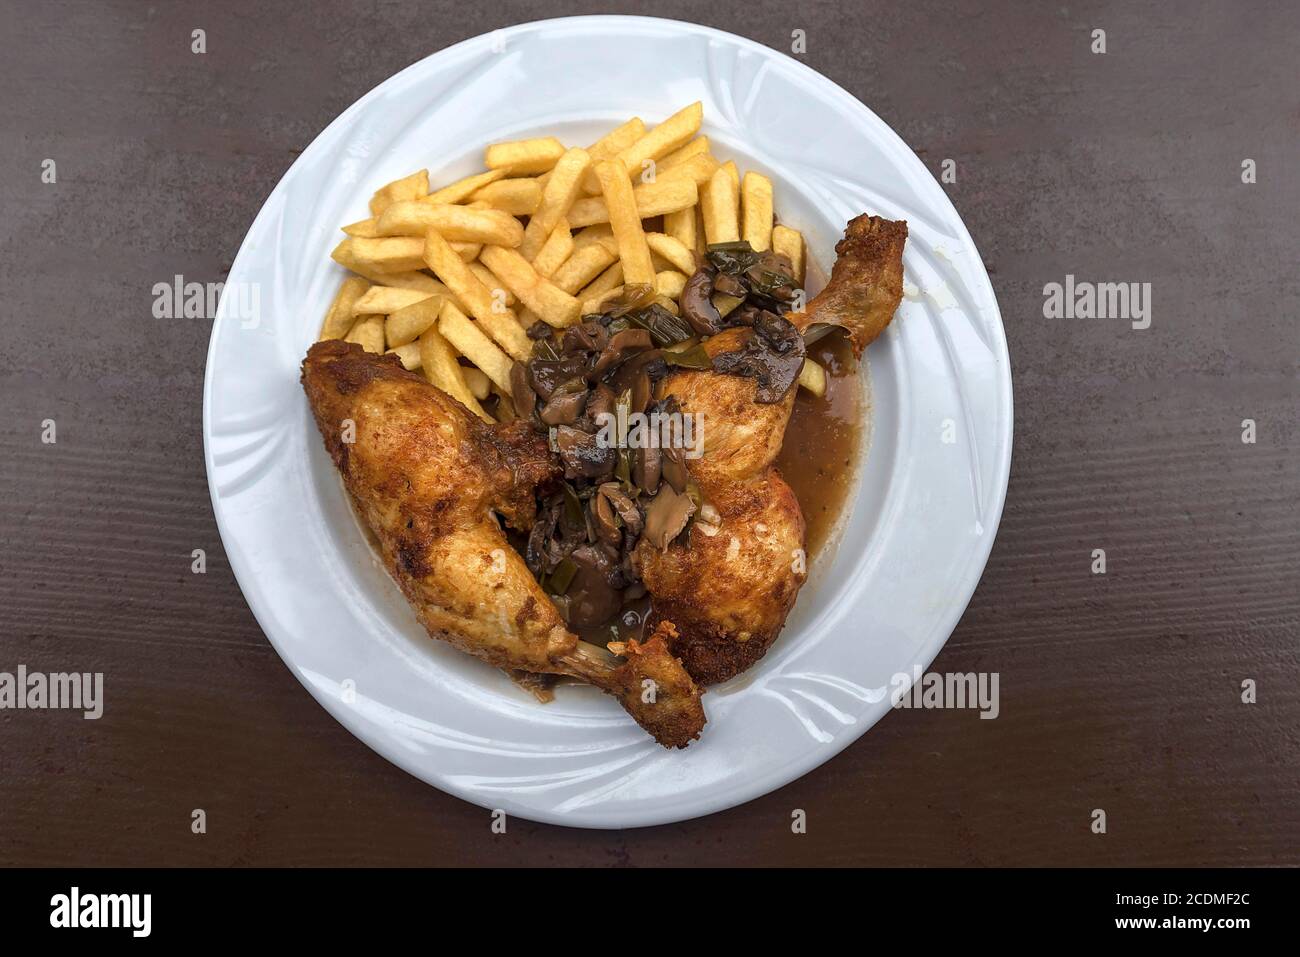 Two chicken legs with mushroom spring onions, French fries, served on plate, Lower Franconia, Bavaria, Germany Stock Photo